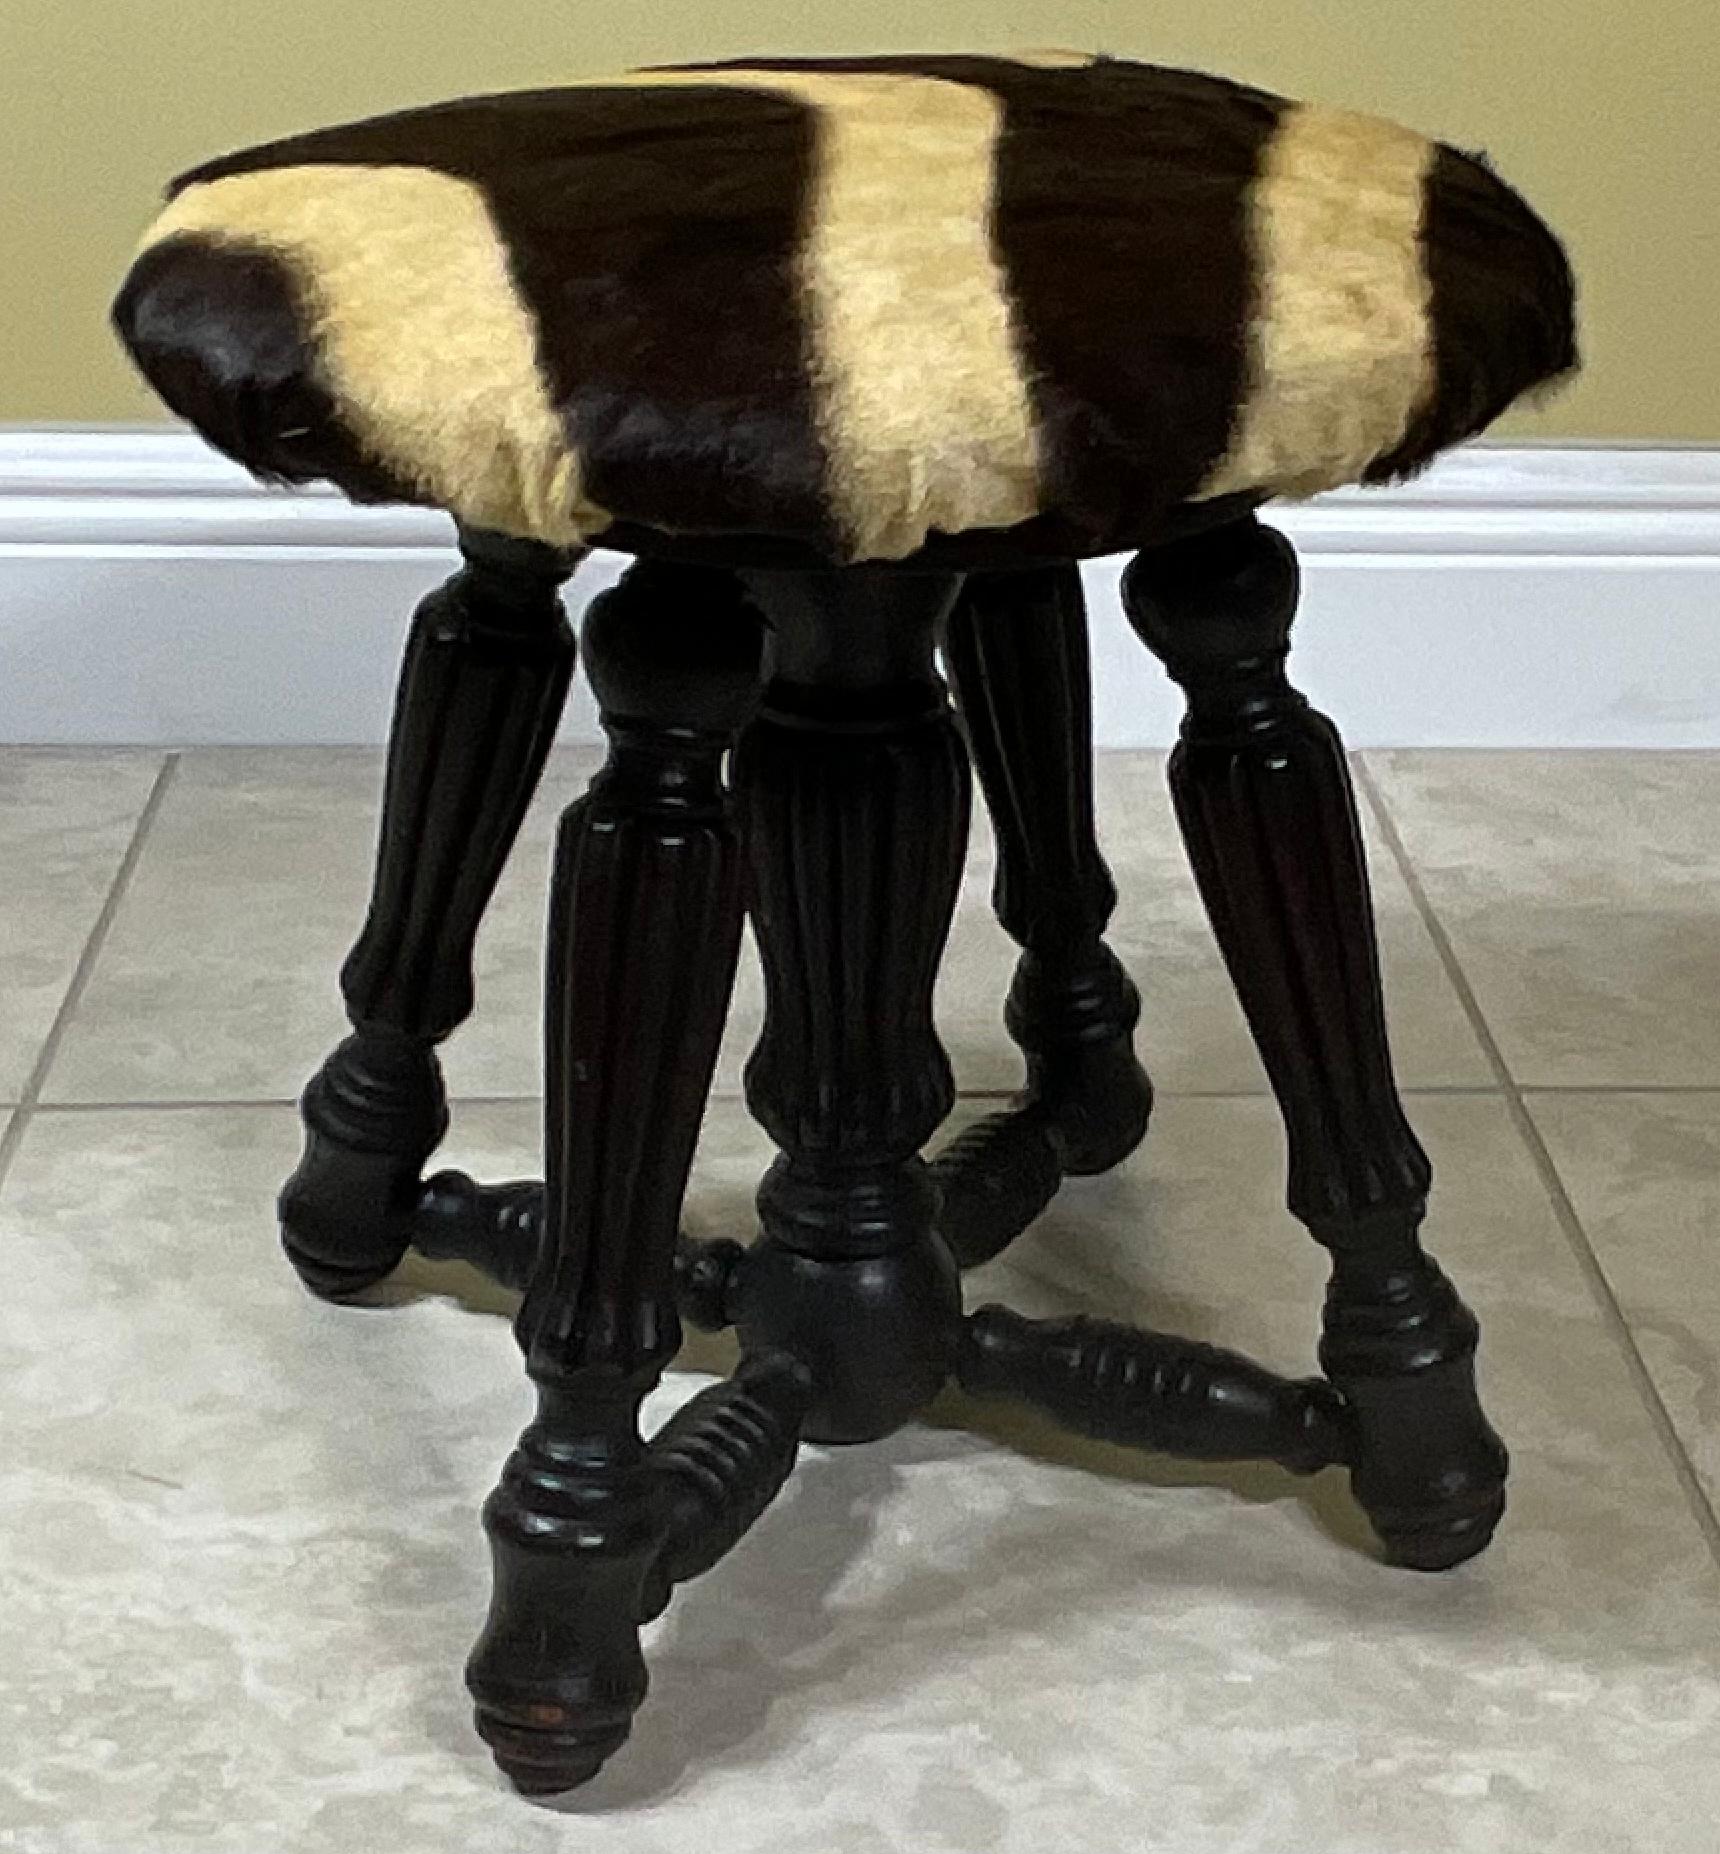 Elegant foot stool made genuine zebra hide top mounted on solid antique wood carved decorative base.
Great decorative item for any room.
 